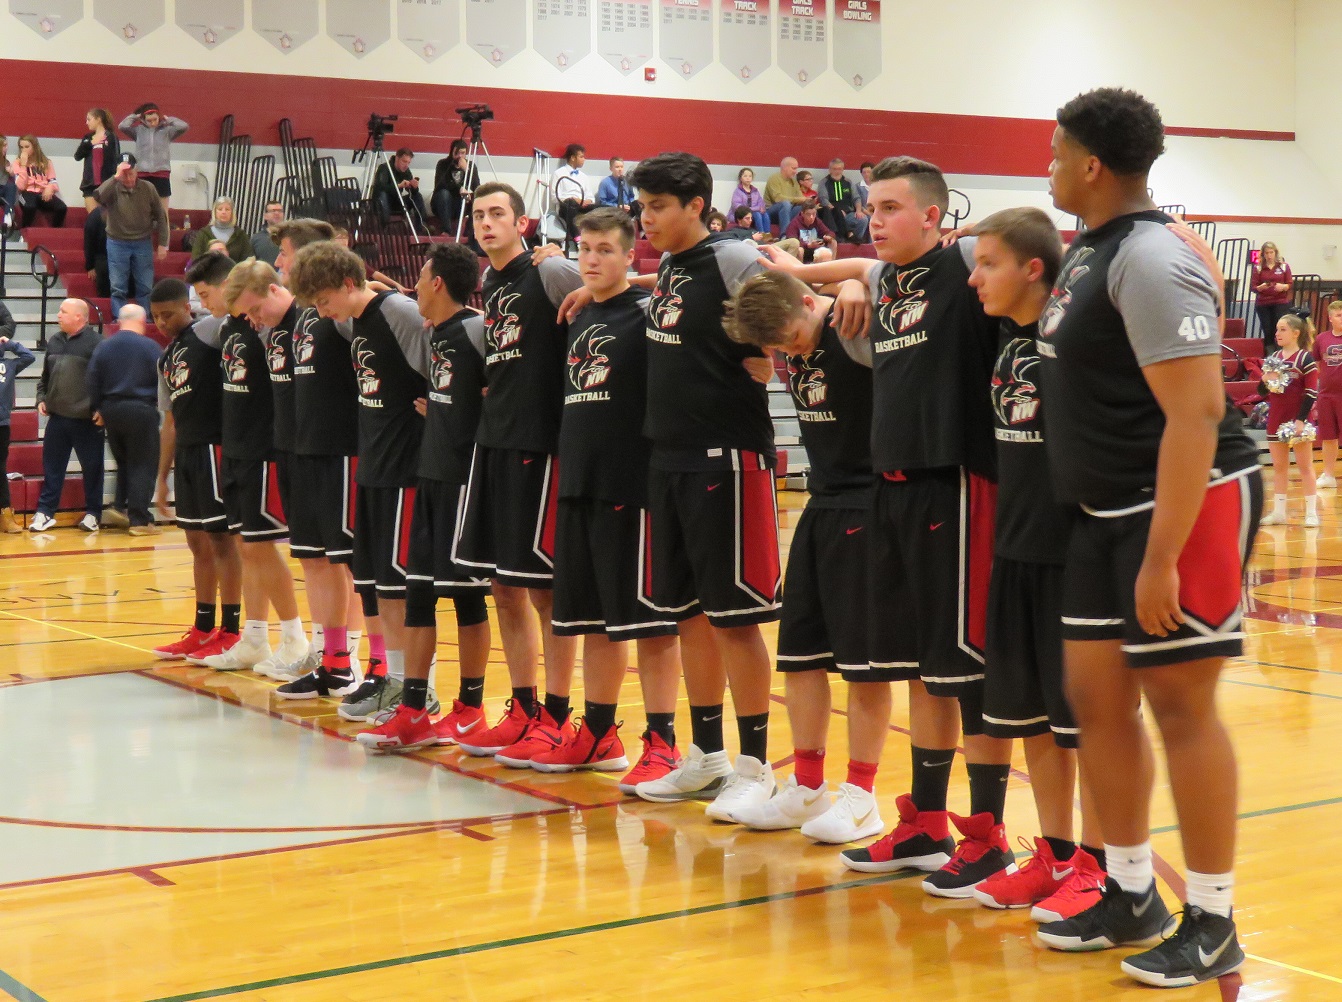 The Niagara-Wheatfield boys basketball team stands for the pledge before Tuesday night's contest versus Starpoint High School. (Photo by David Yarger)